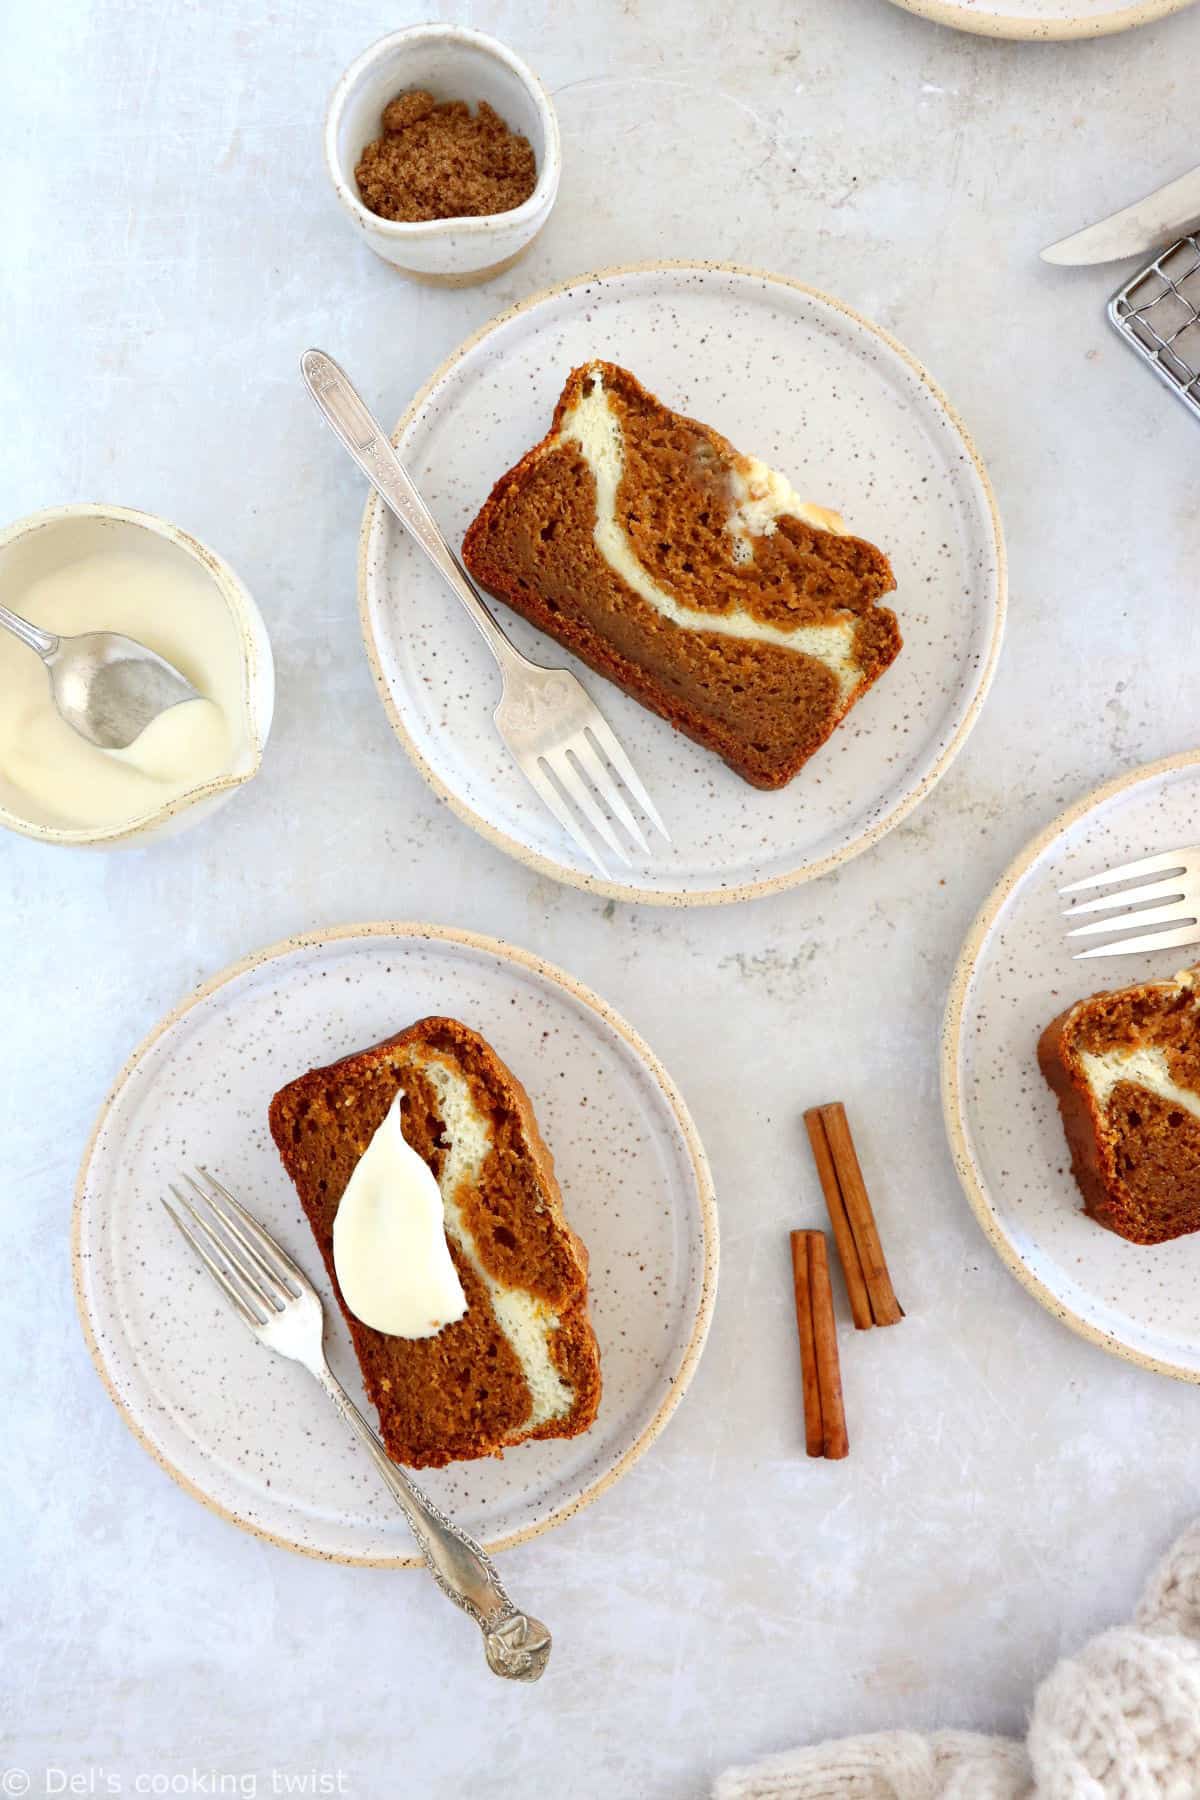 Brown butter pumpkin bread with cream cheese is the ultimate fall treat to indulge. This pumpkin bread is soft, moist, loaded with pumpkin spice flavors, and better than in your favorite coffee shop!